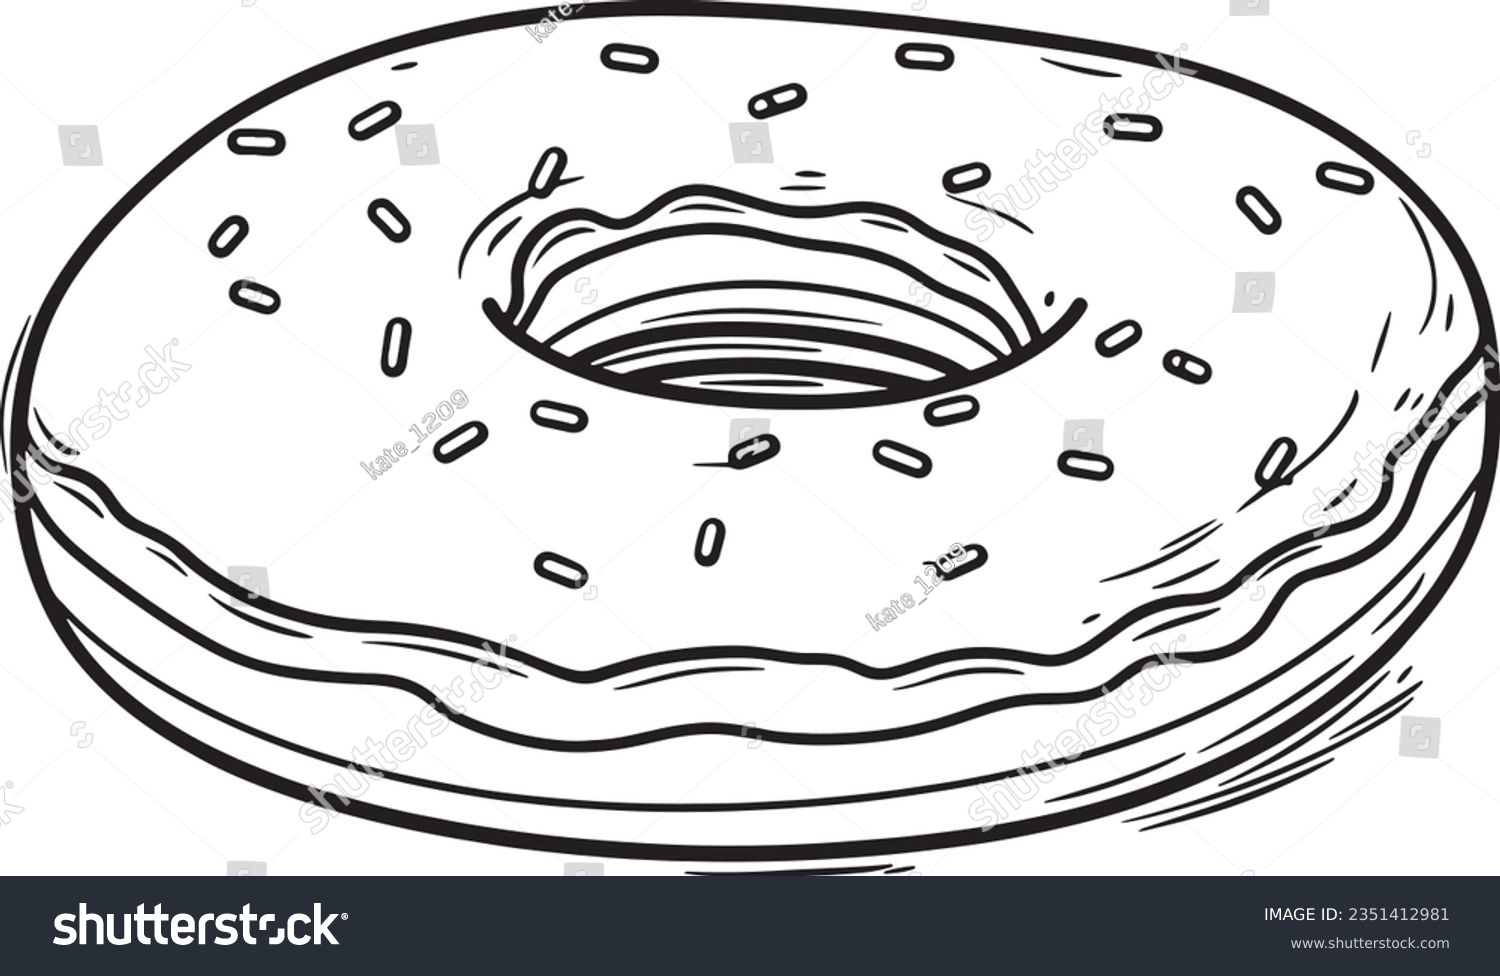 SVG of Donut engraving style, Basic simple Minimalist vector SVG logo graphic, isolated on white background, children's coloring page, outline art, thick crisp lines, black and white svg